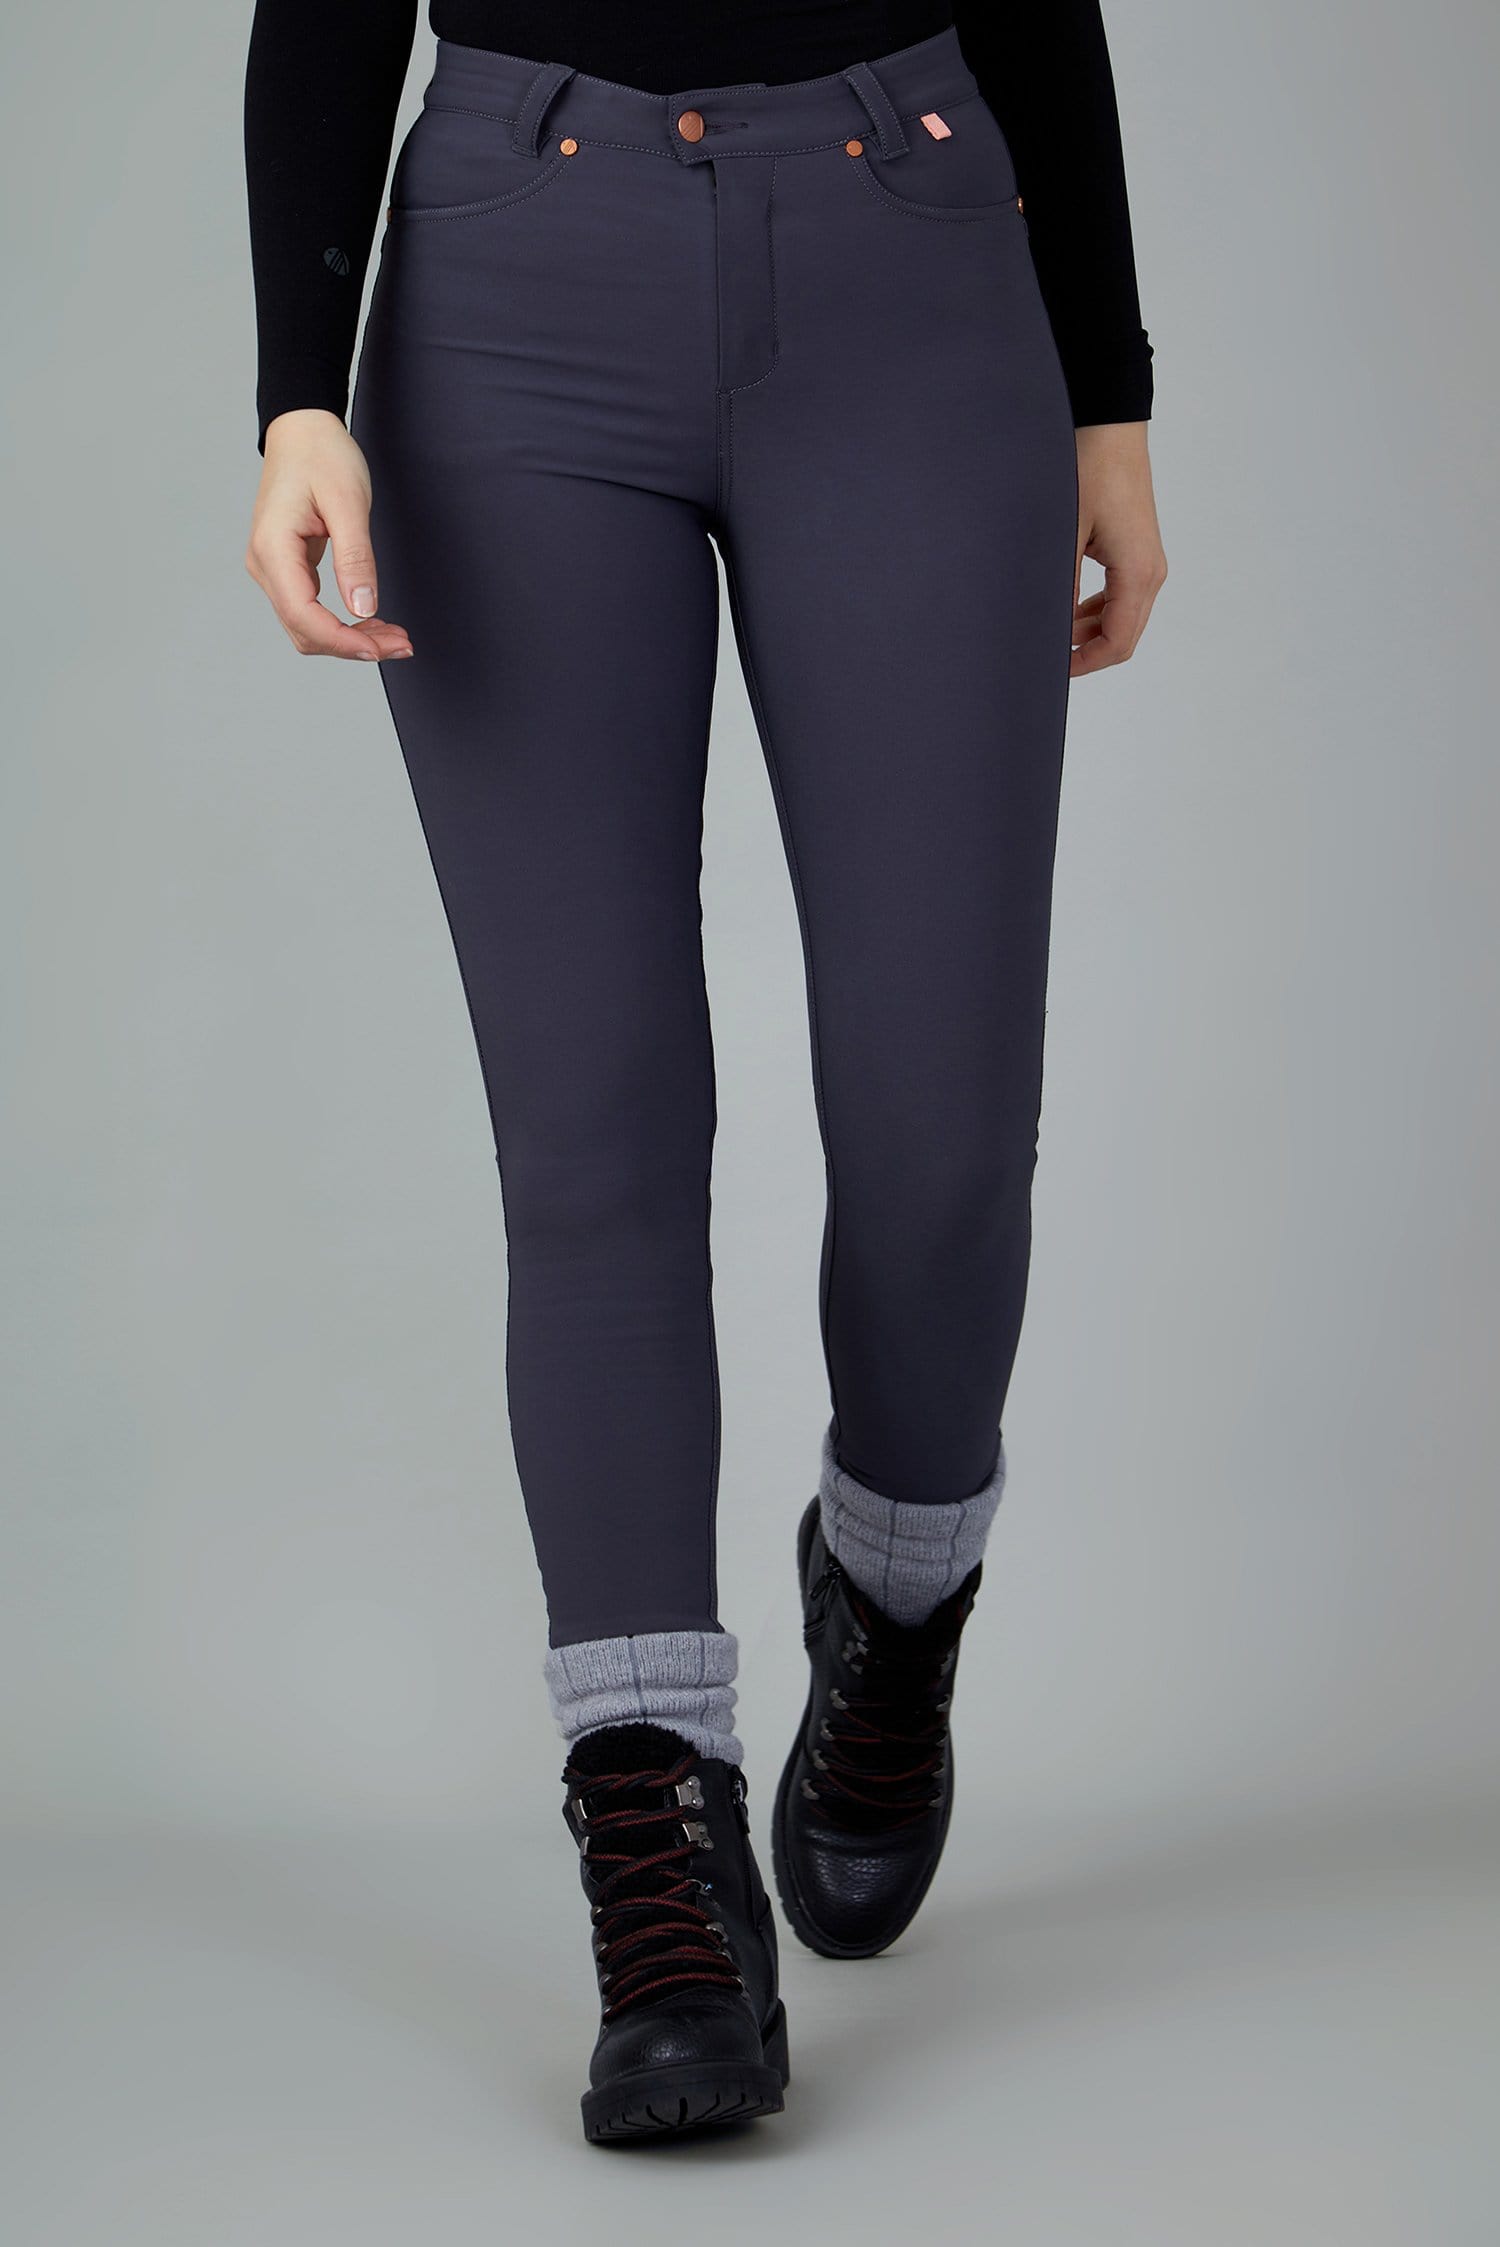 The Aventurite Stretch Skinny Outdoor Trousers - Obsidian - 28p / Uk10 - Womens - Acai Outdoorwear